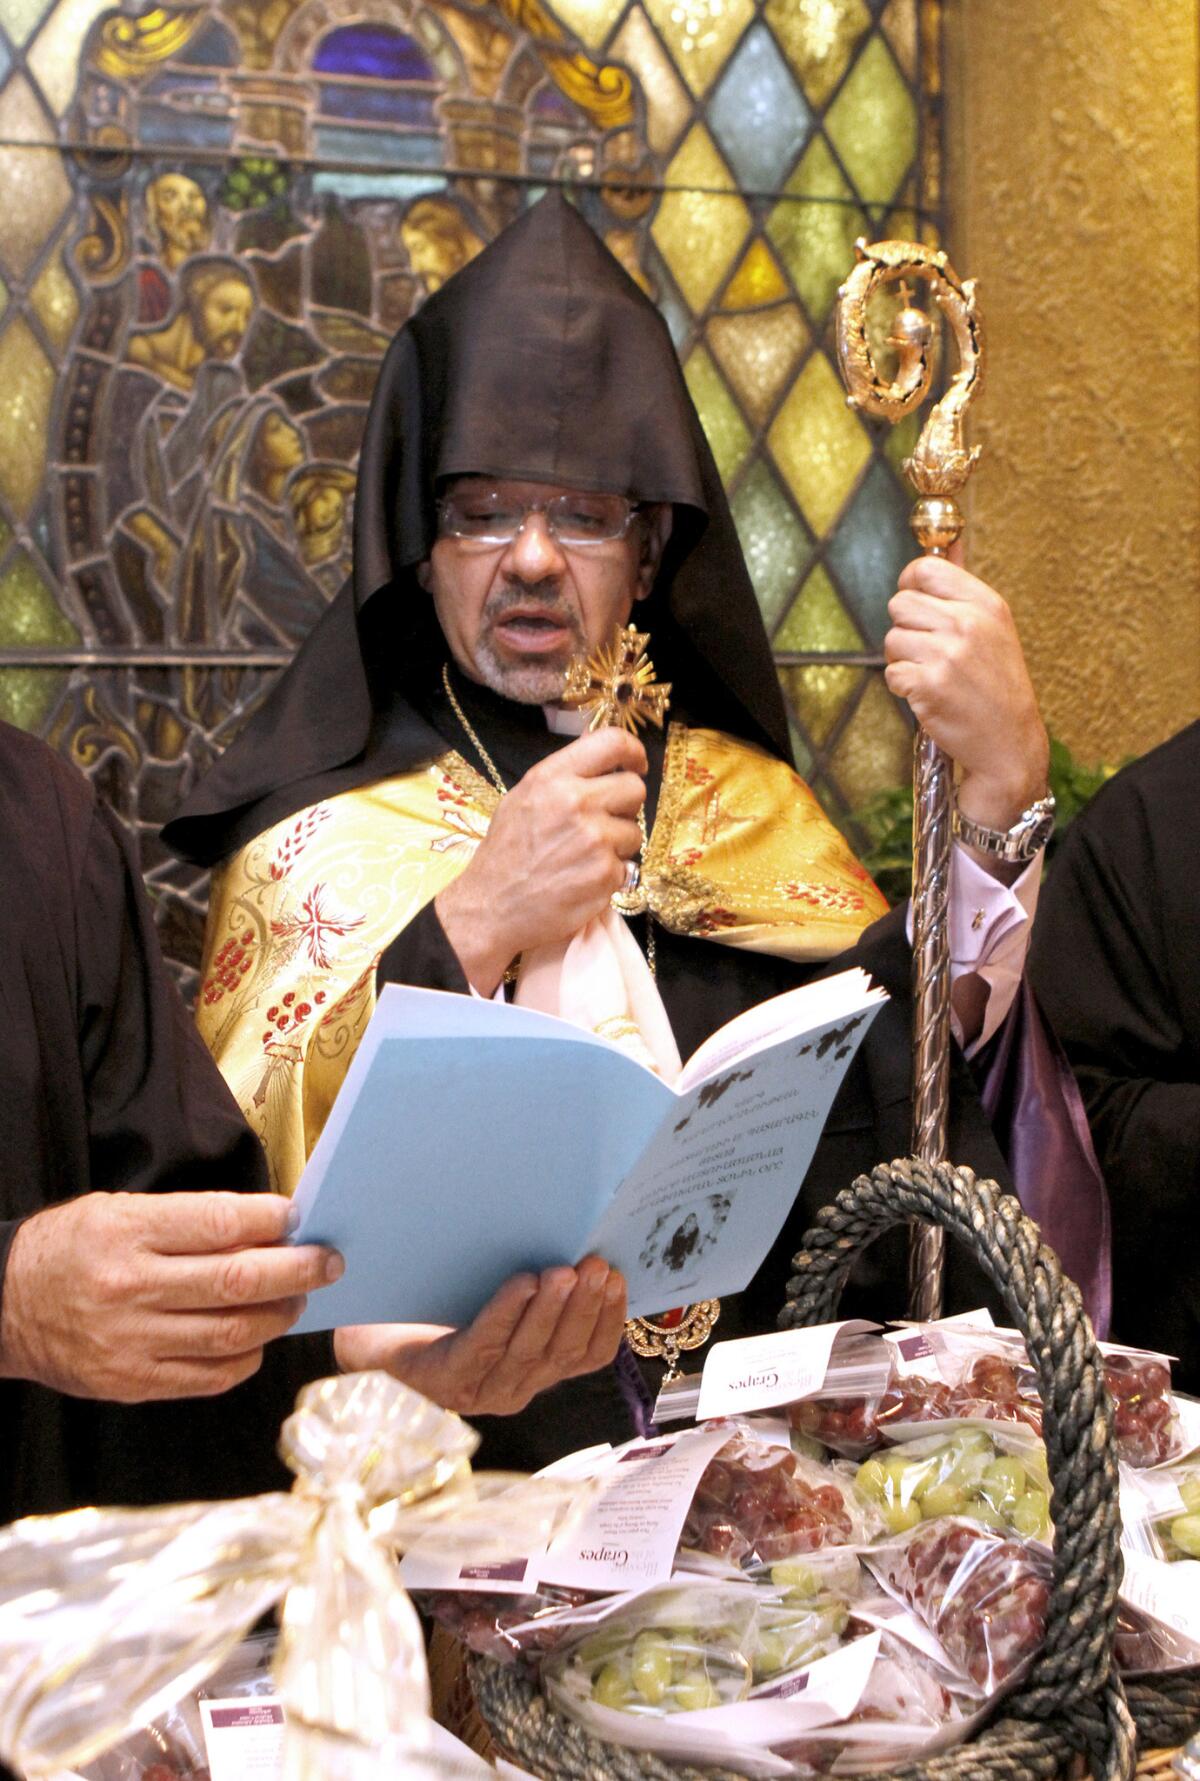 Archbishop Moushegh Mardirossian, Prelate of the Armenian Apostolic Church of the Western United States, center, performs the annual Armenian harvest-time celebration blessing of the grapes at Glendale Adventist Medical Center in Glendale on Wednesday, Aug. 13, 2014. Baskets with about 300 bags of grapes were blessed.